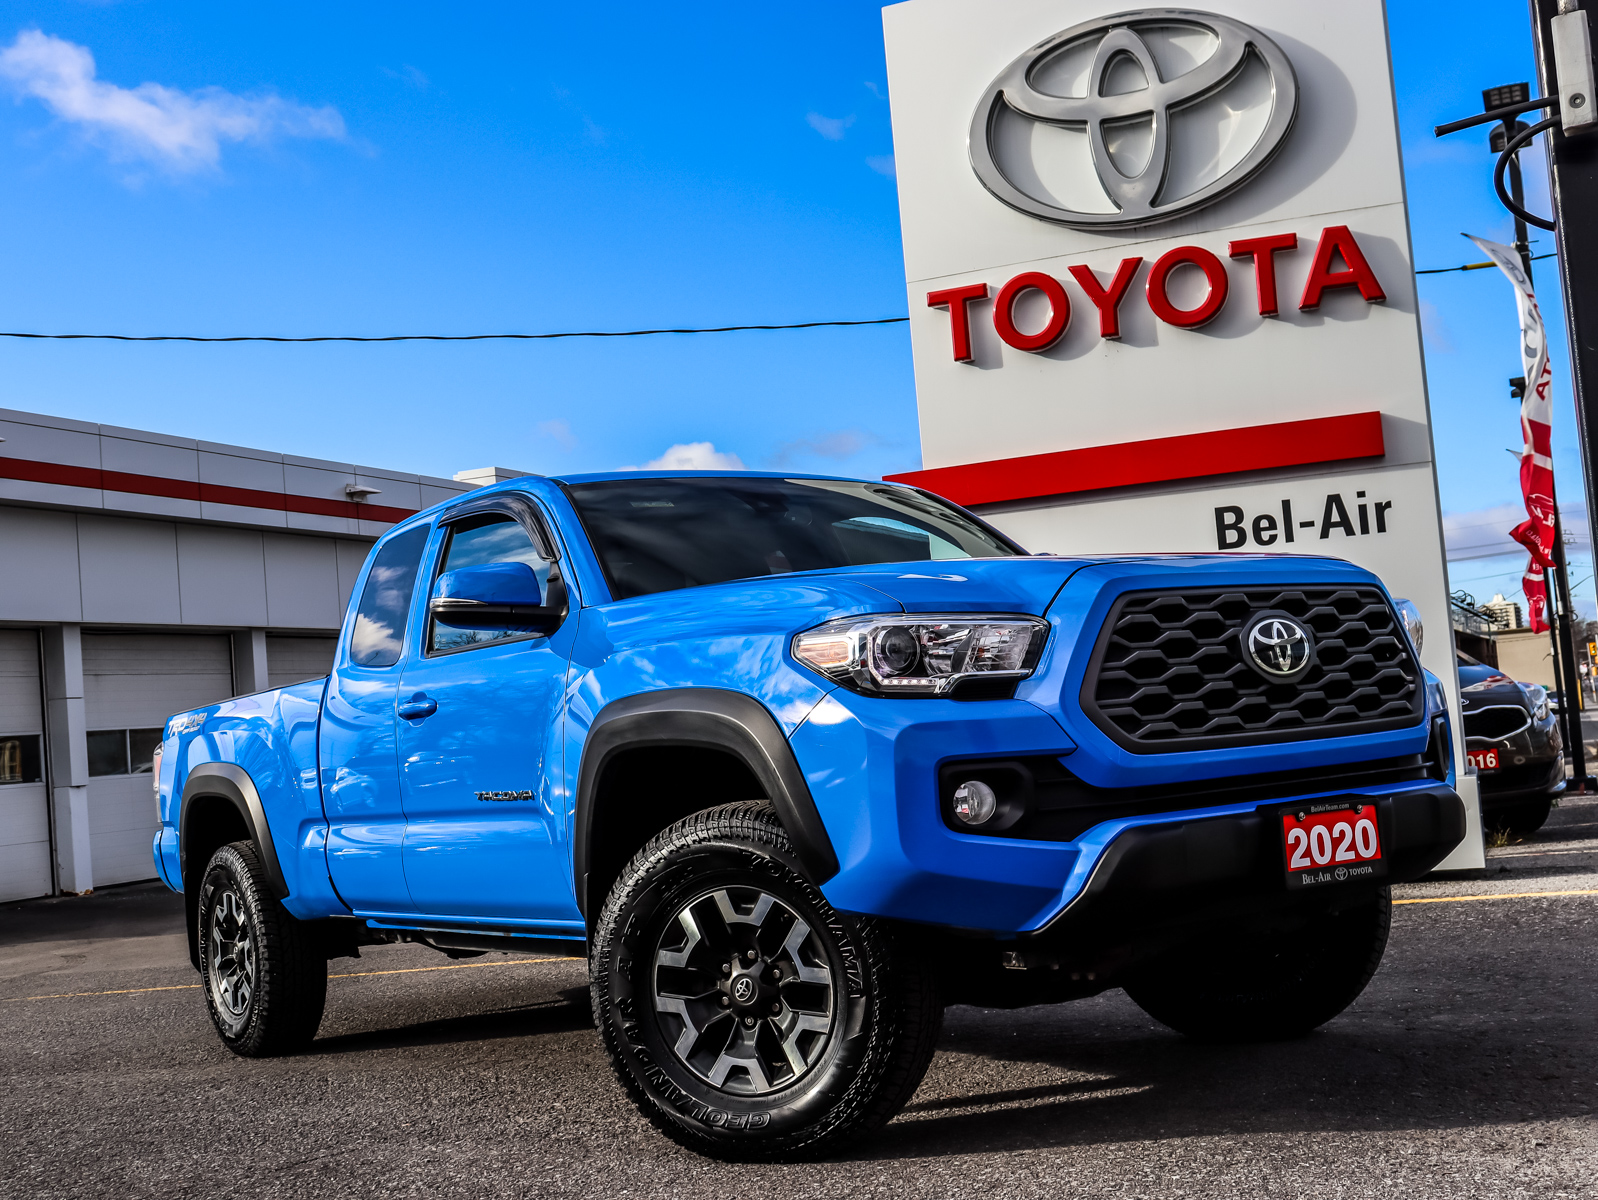 2020 Toyota Tacoma at Bel-Air Toyota